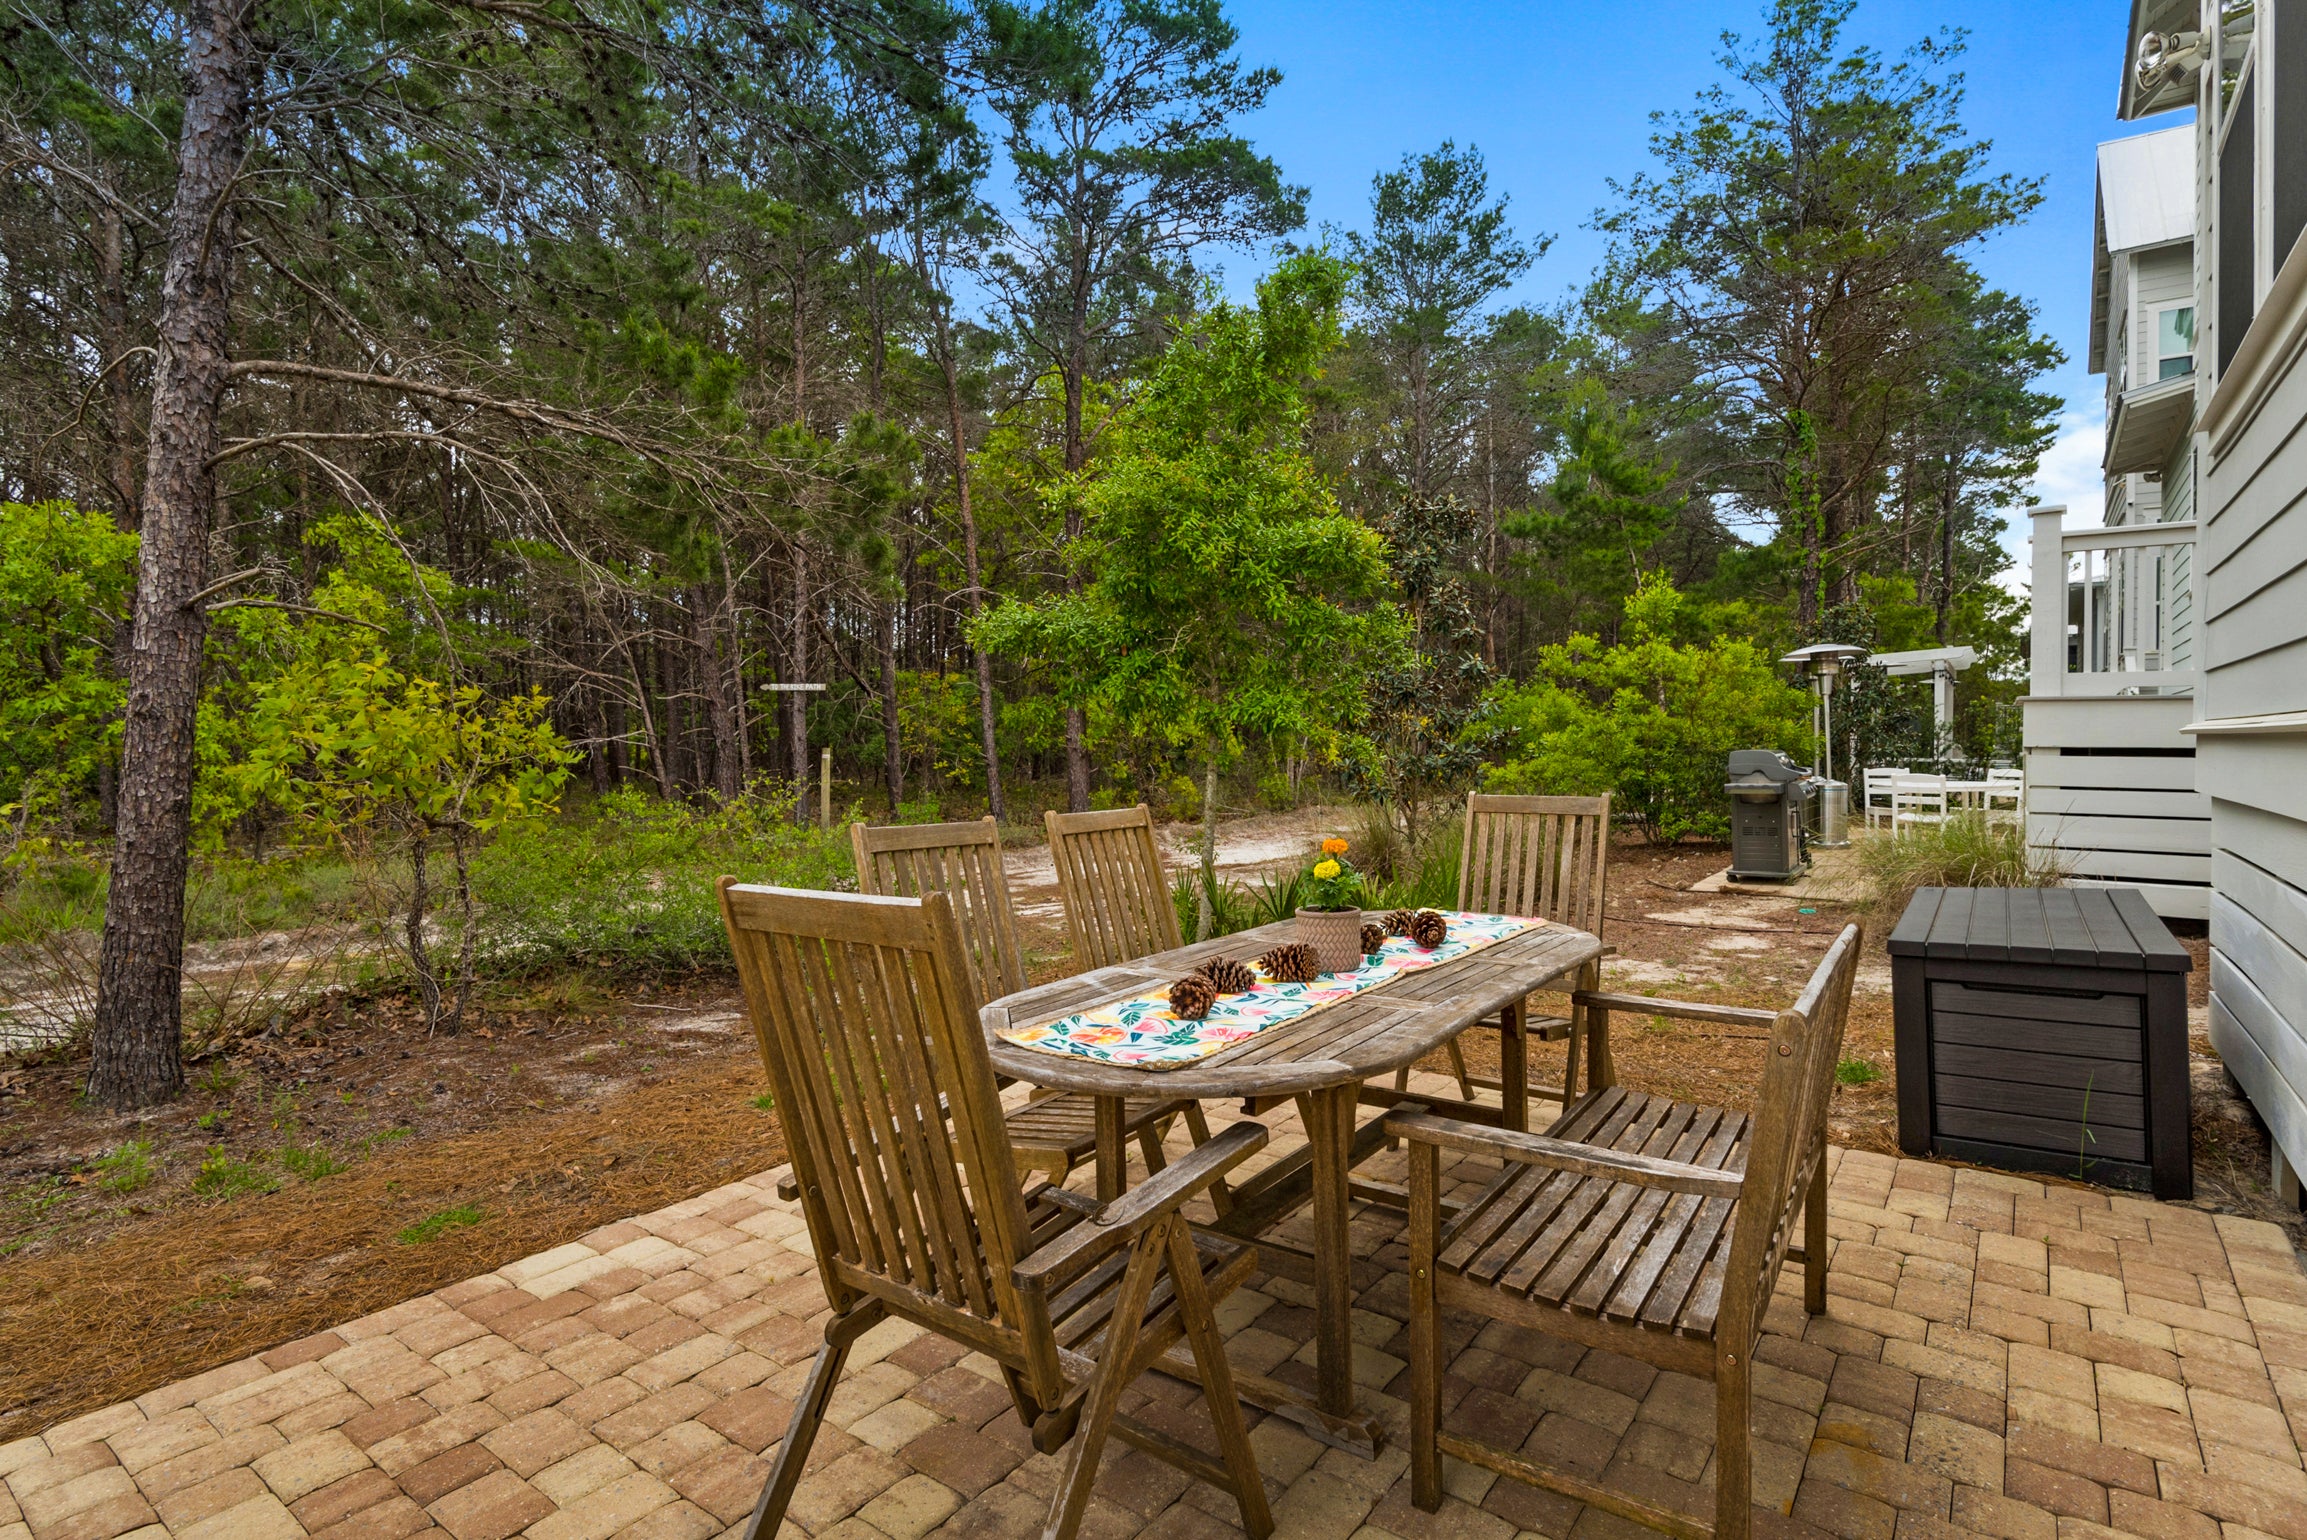 Enjoy a meal on the back patio